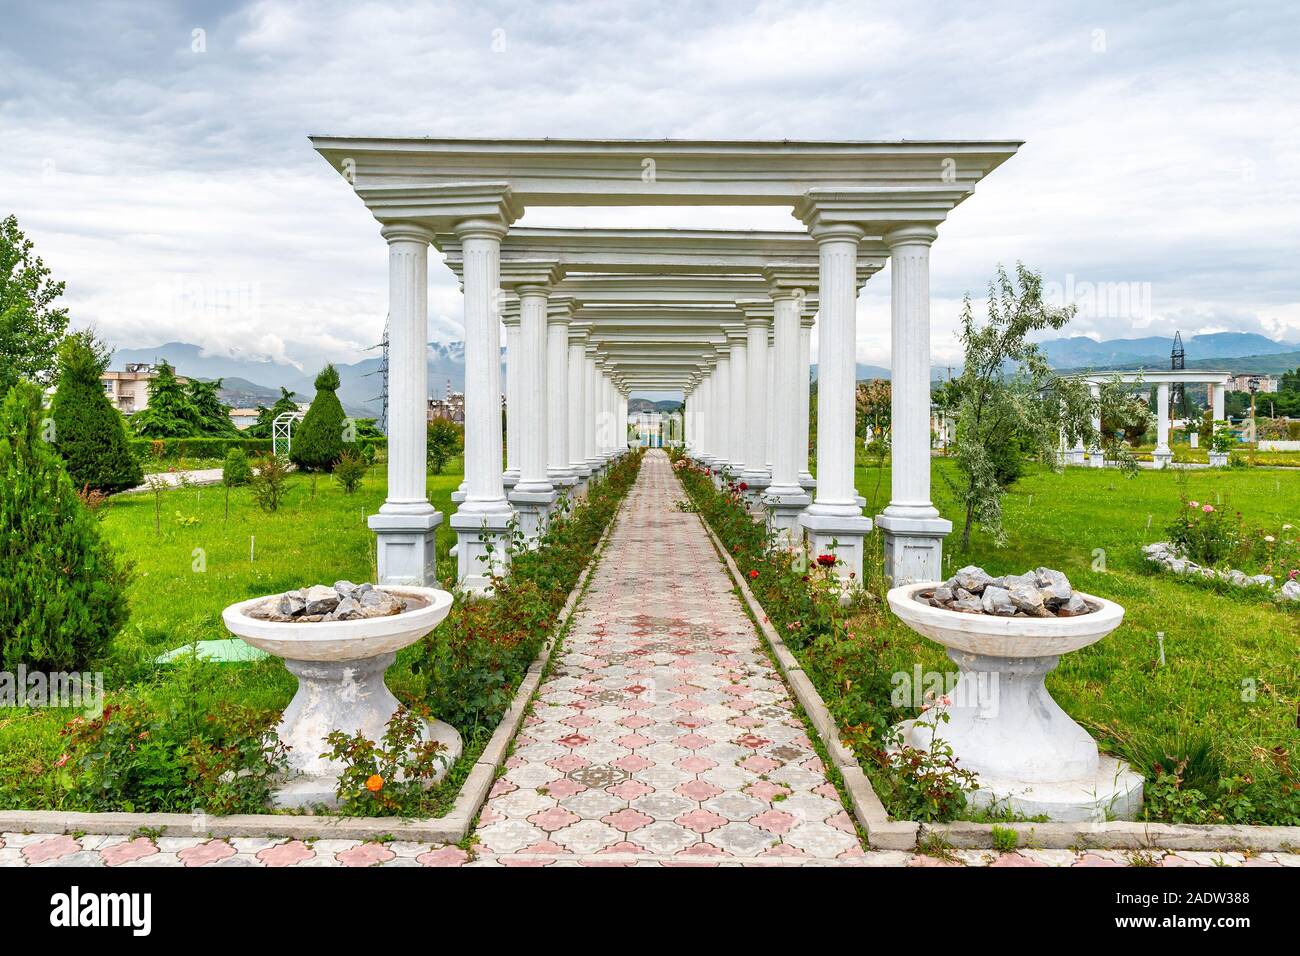 Dushanbe Amphitheater Park Picturesque Leading Lines Garden View at Ismoil Somoni Avenue on a Cloudy Rainy Sky Day Stock Photo